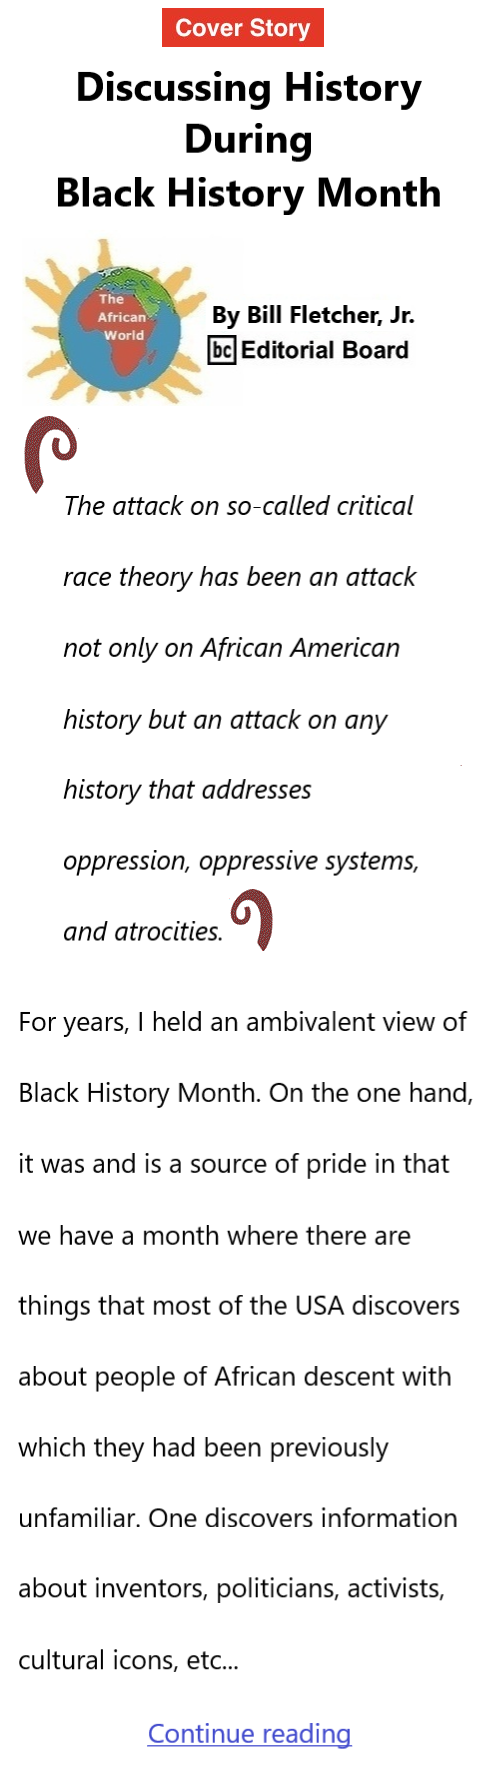 BlackCommentator.com Feb 22, 2024 - Issue 989: Black History Month Cover Story: Discussing History During Black History Month - The African World By Bill Fletcher, Jr., BC Editorial Board  